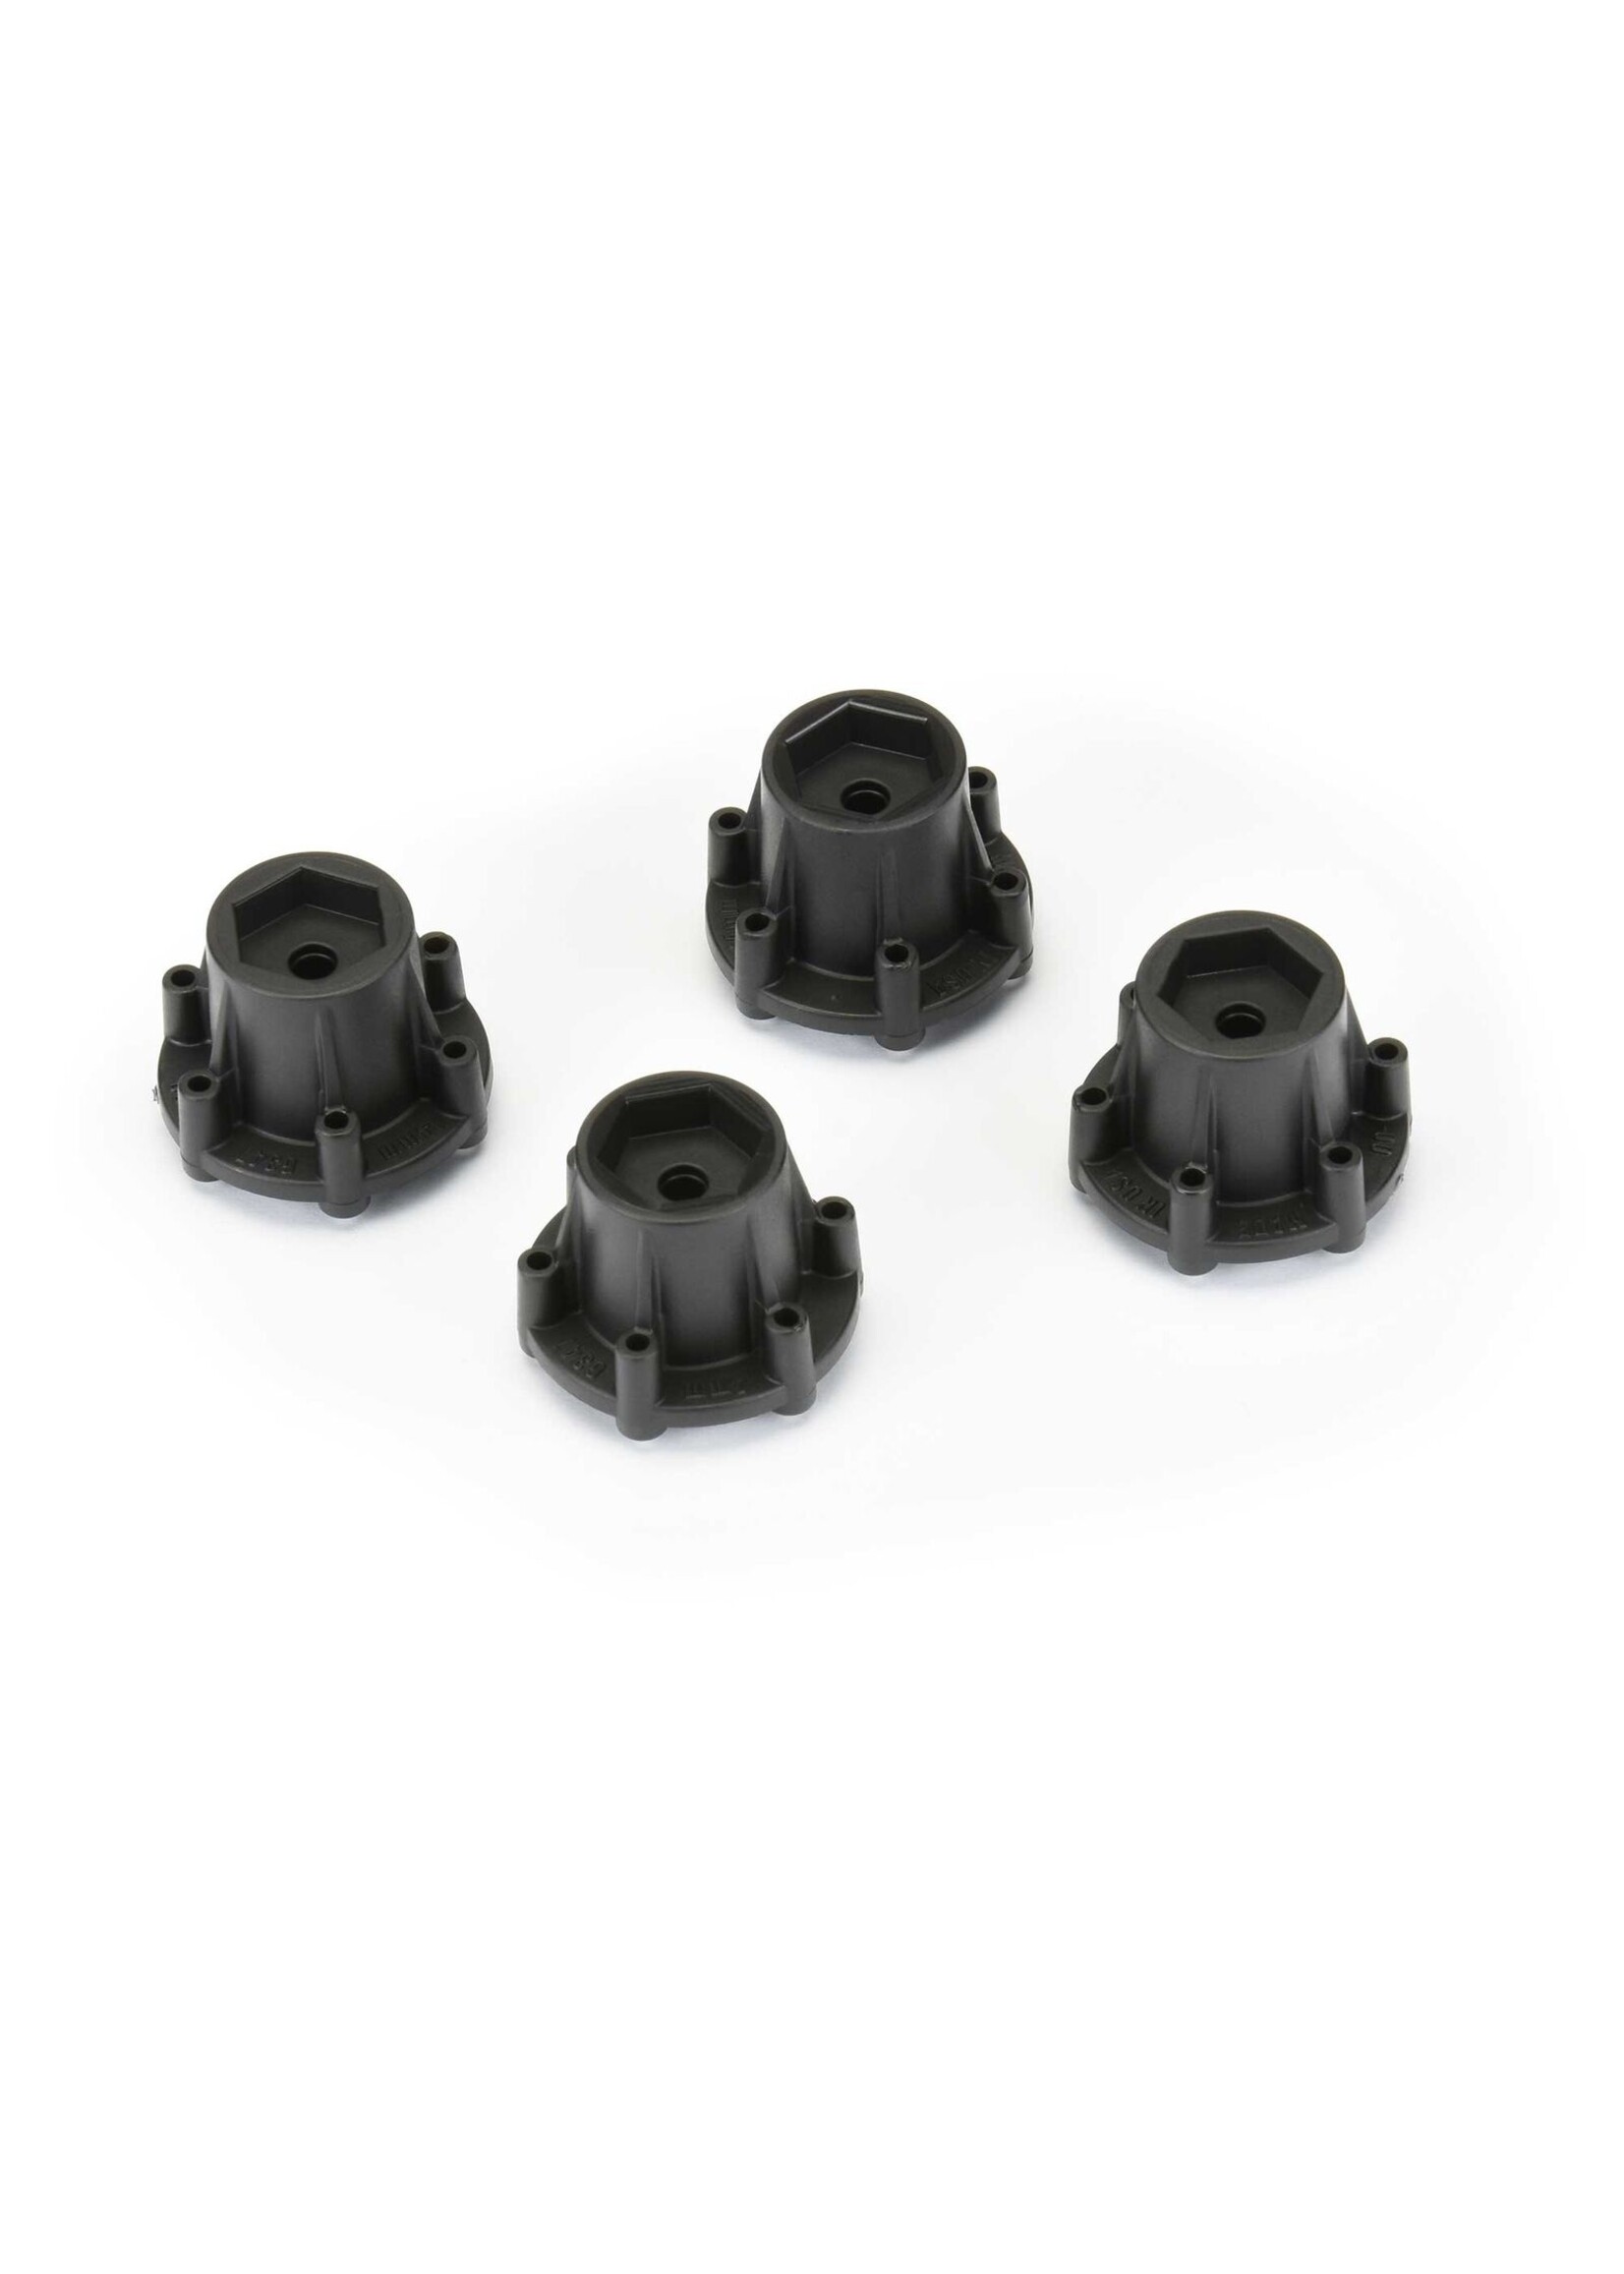 Pro-Line PRO634700 - 6x30 to 14mm Hex Adapters for 6x30 2.8" Wheels